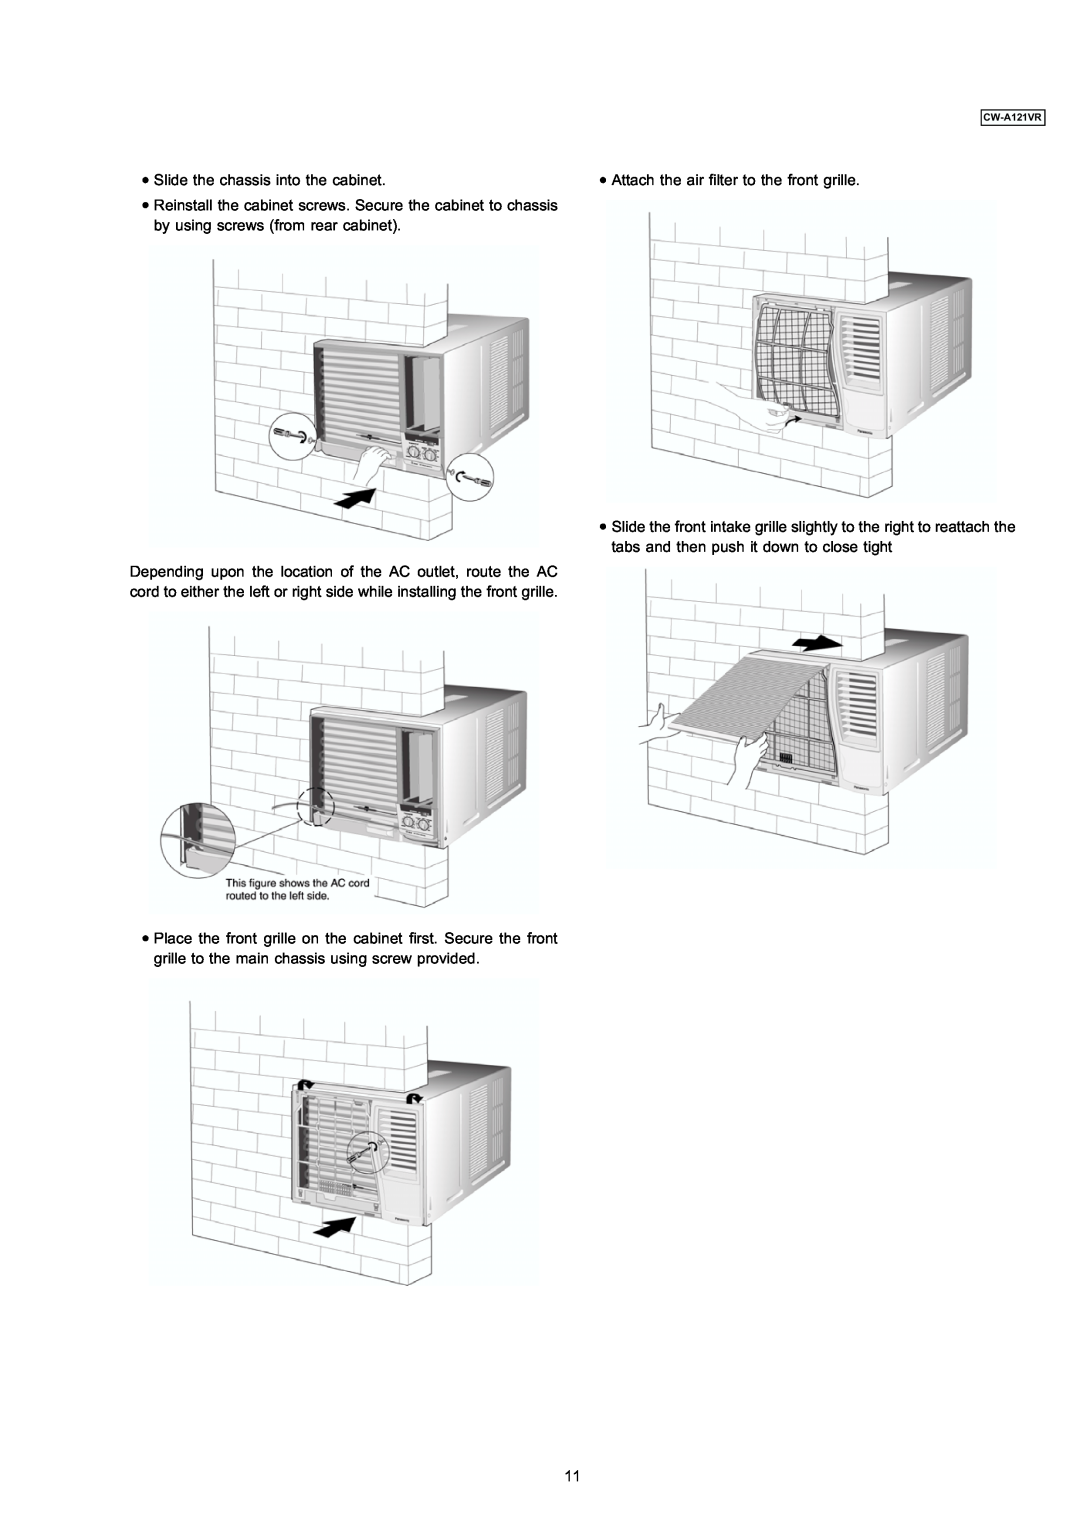 Panasonic CW-A121VR manual Slide the chassis into the cabinet 